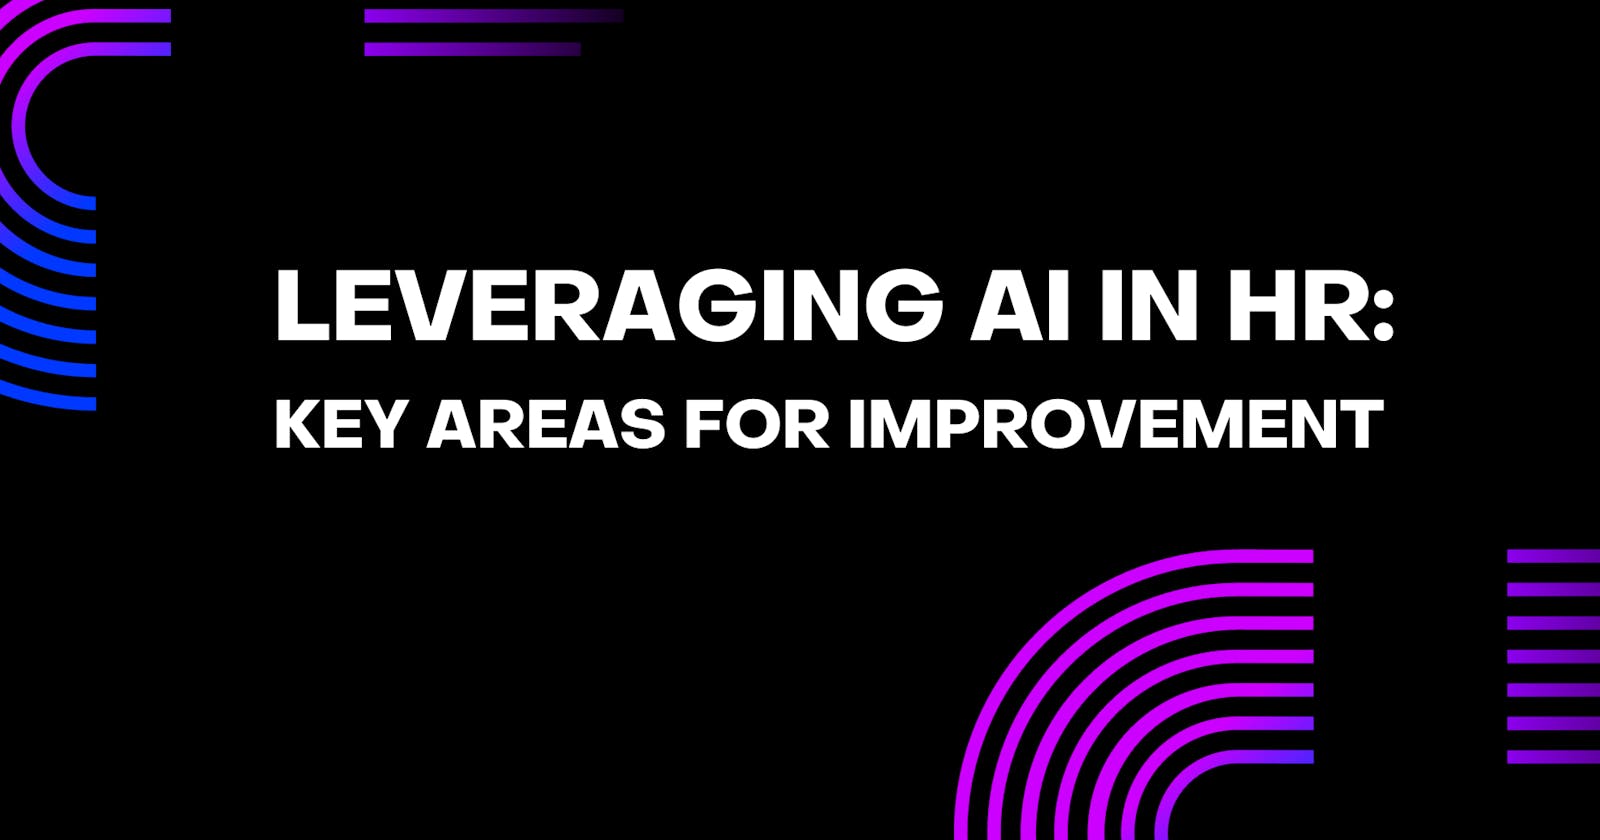 Leveraging AI in HR: Key Areas for Improvement